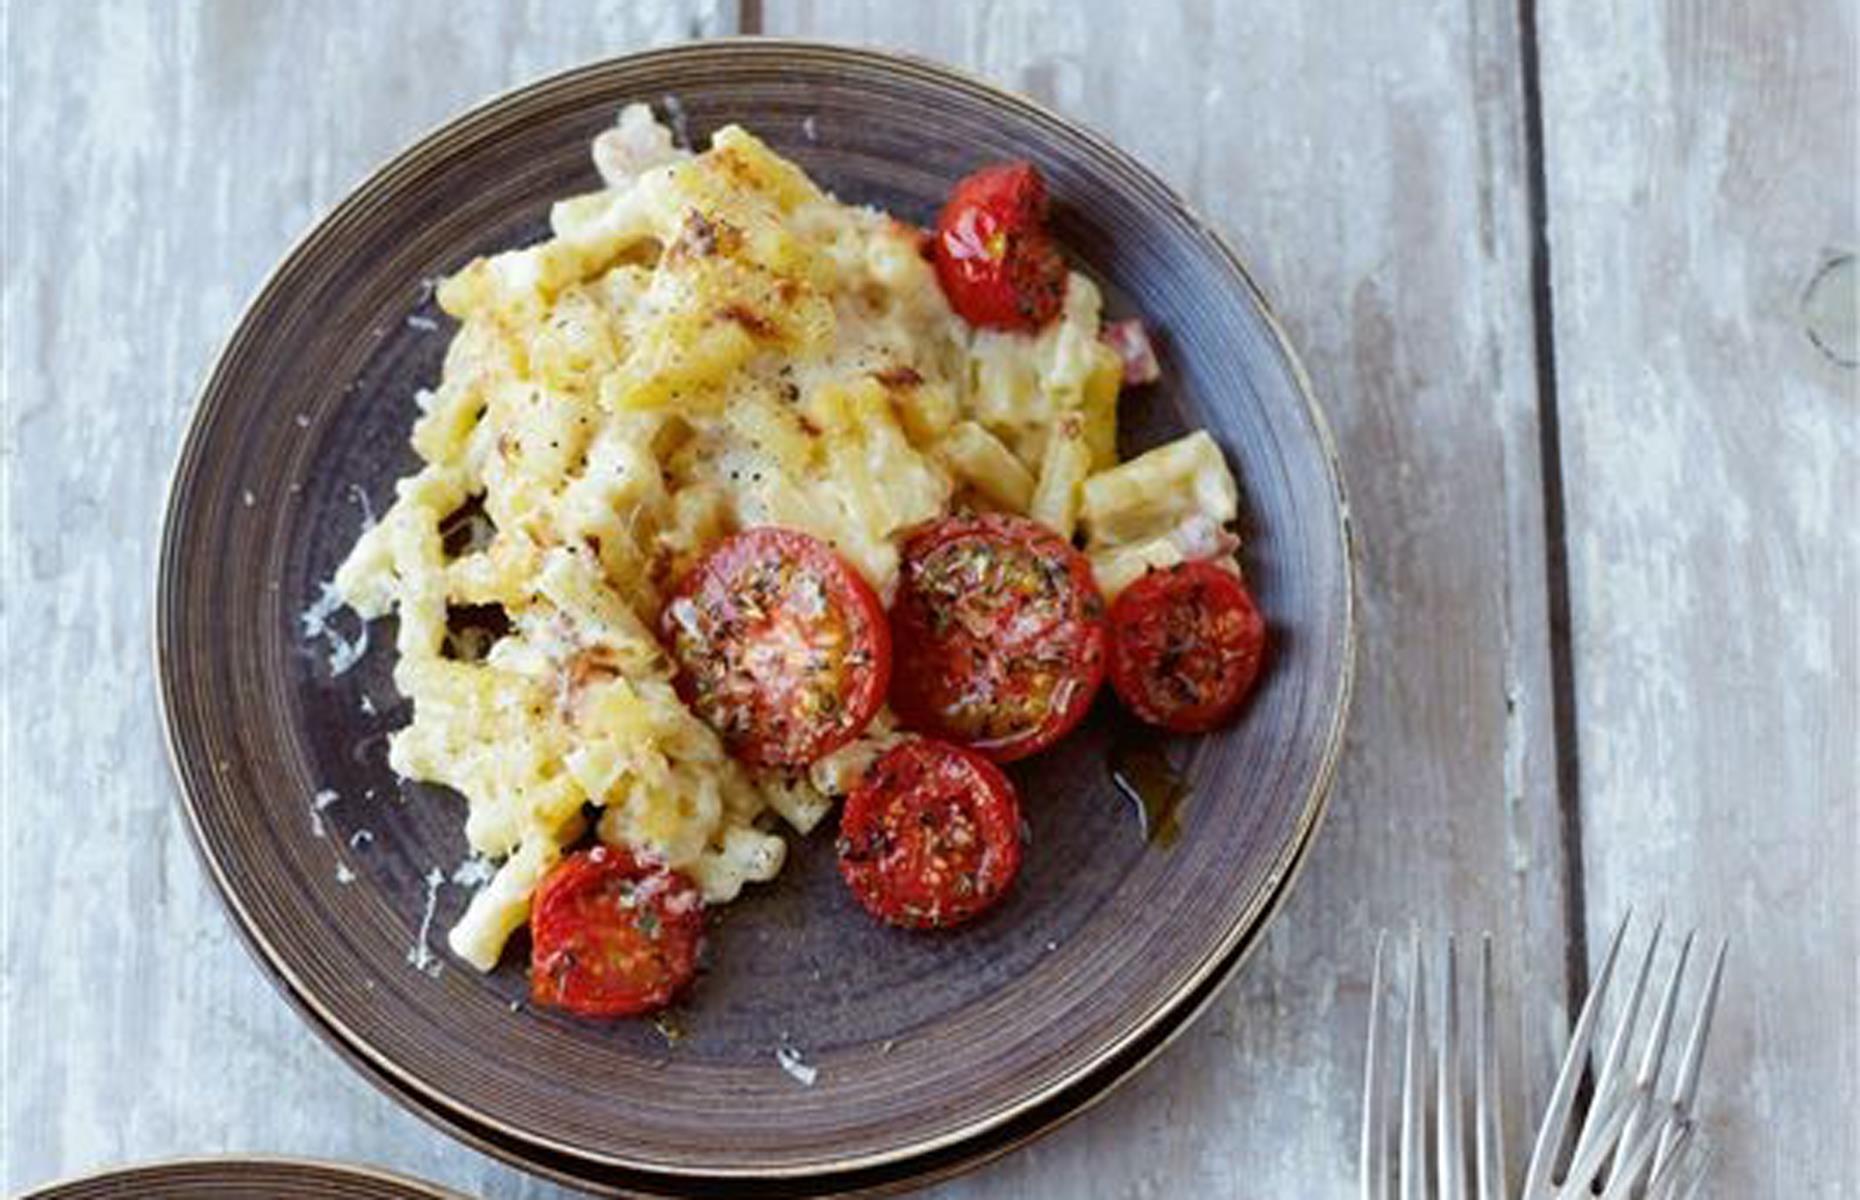 <p>Spiced ground beef, pulled pork or chopped hot dogs are all classic, hearty toppings. For something fresher, try incorporating grilled tomatoes or additions such as chopped scallions, herbs or chili.</p>  <p><a href="https://www.lovefood.com/recipes/60139/deluxe-macaroni-cheese-with-grilled-tomatoes-recipe"><strong>Get the recipe for mac 'n' cheese with grilled tomatoes here</strong></a></p>